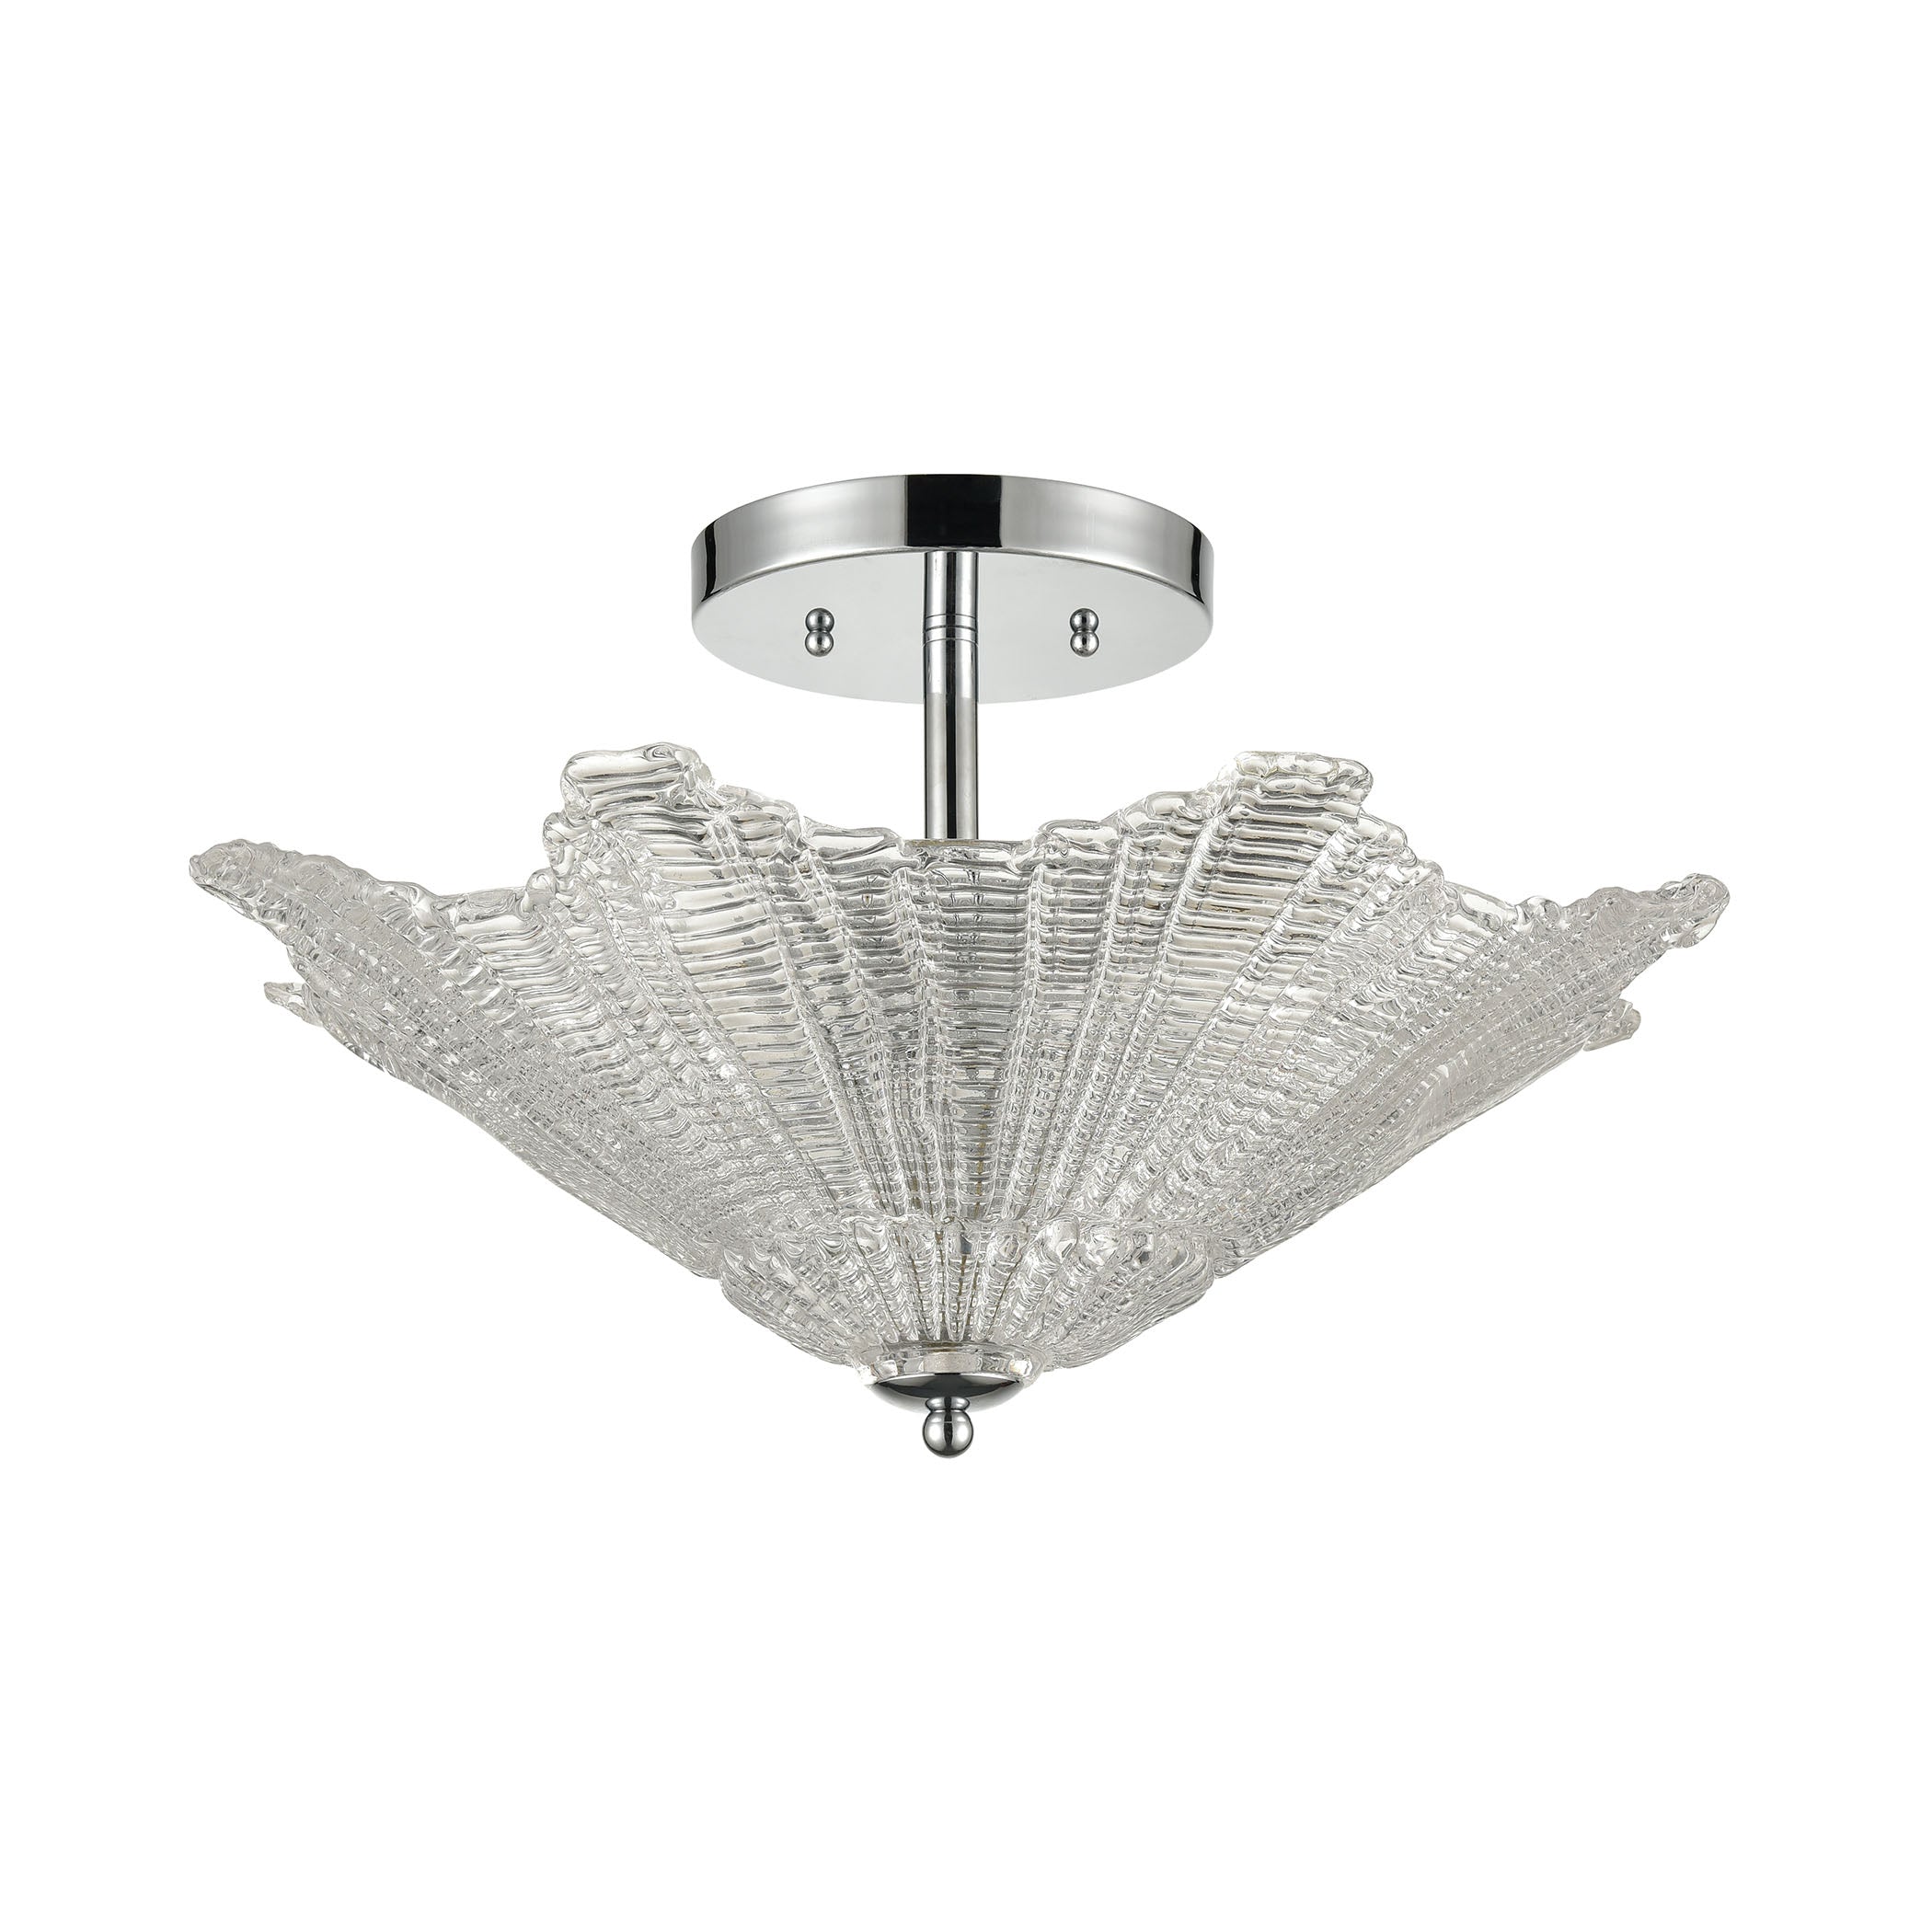 ELK Lighting 60175/4 Radiance 4-Light Semi Flush in Polished Chrome with Clear Textured Glass